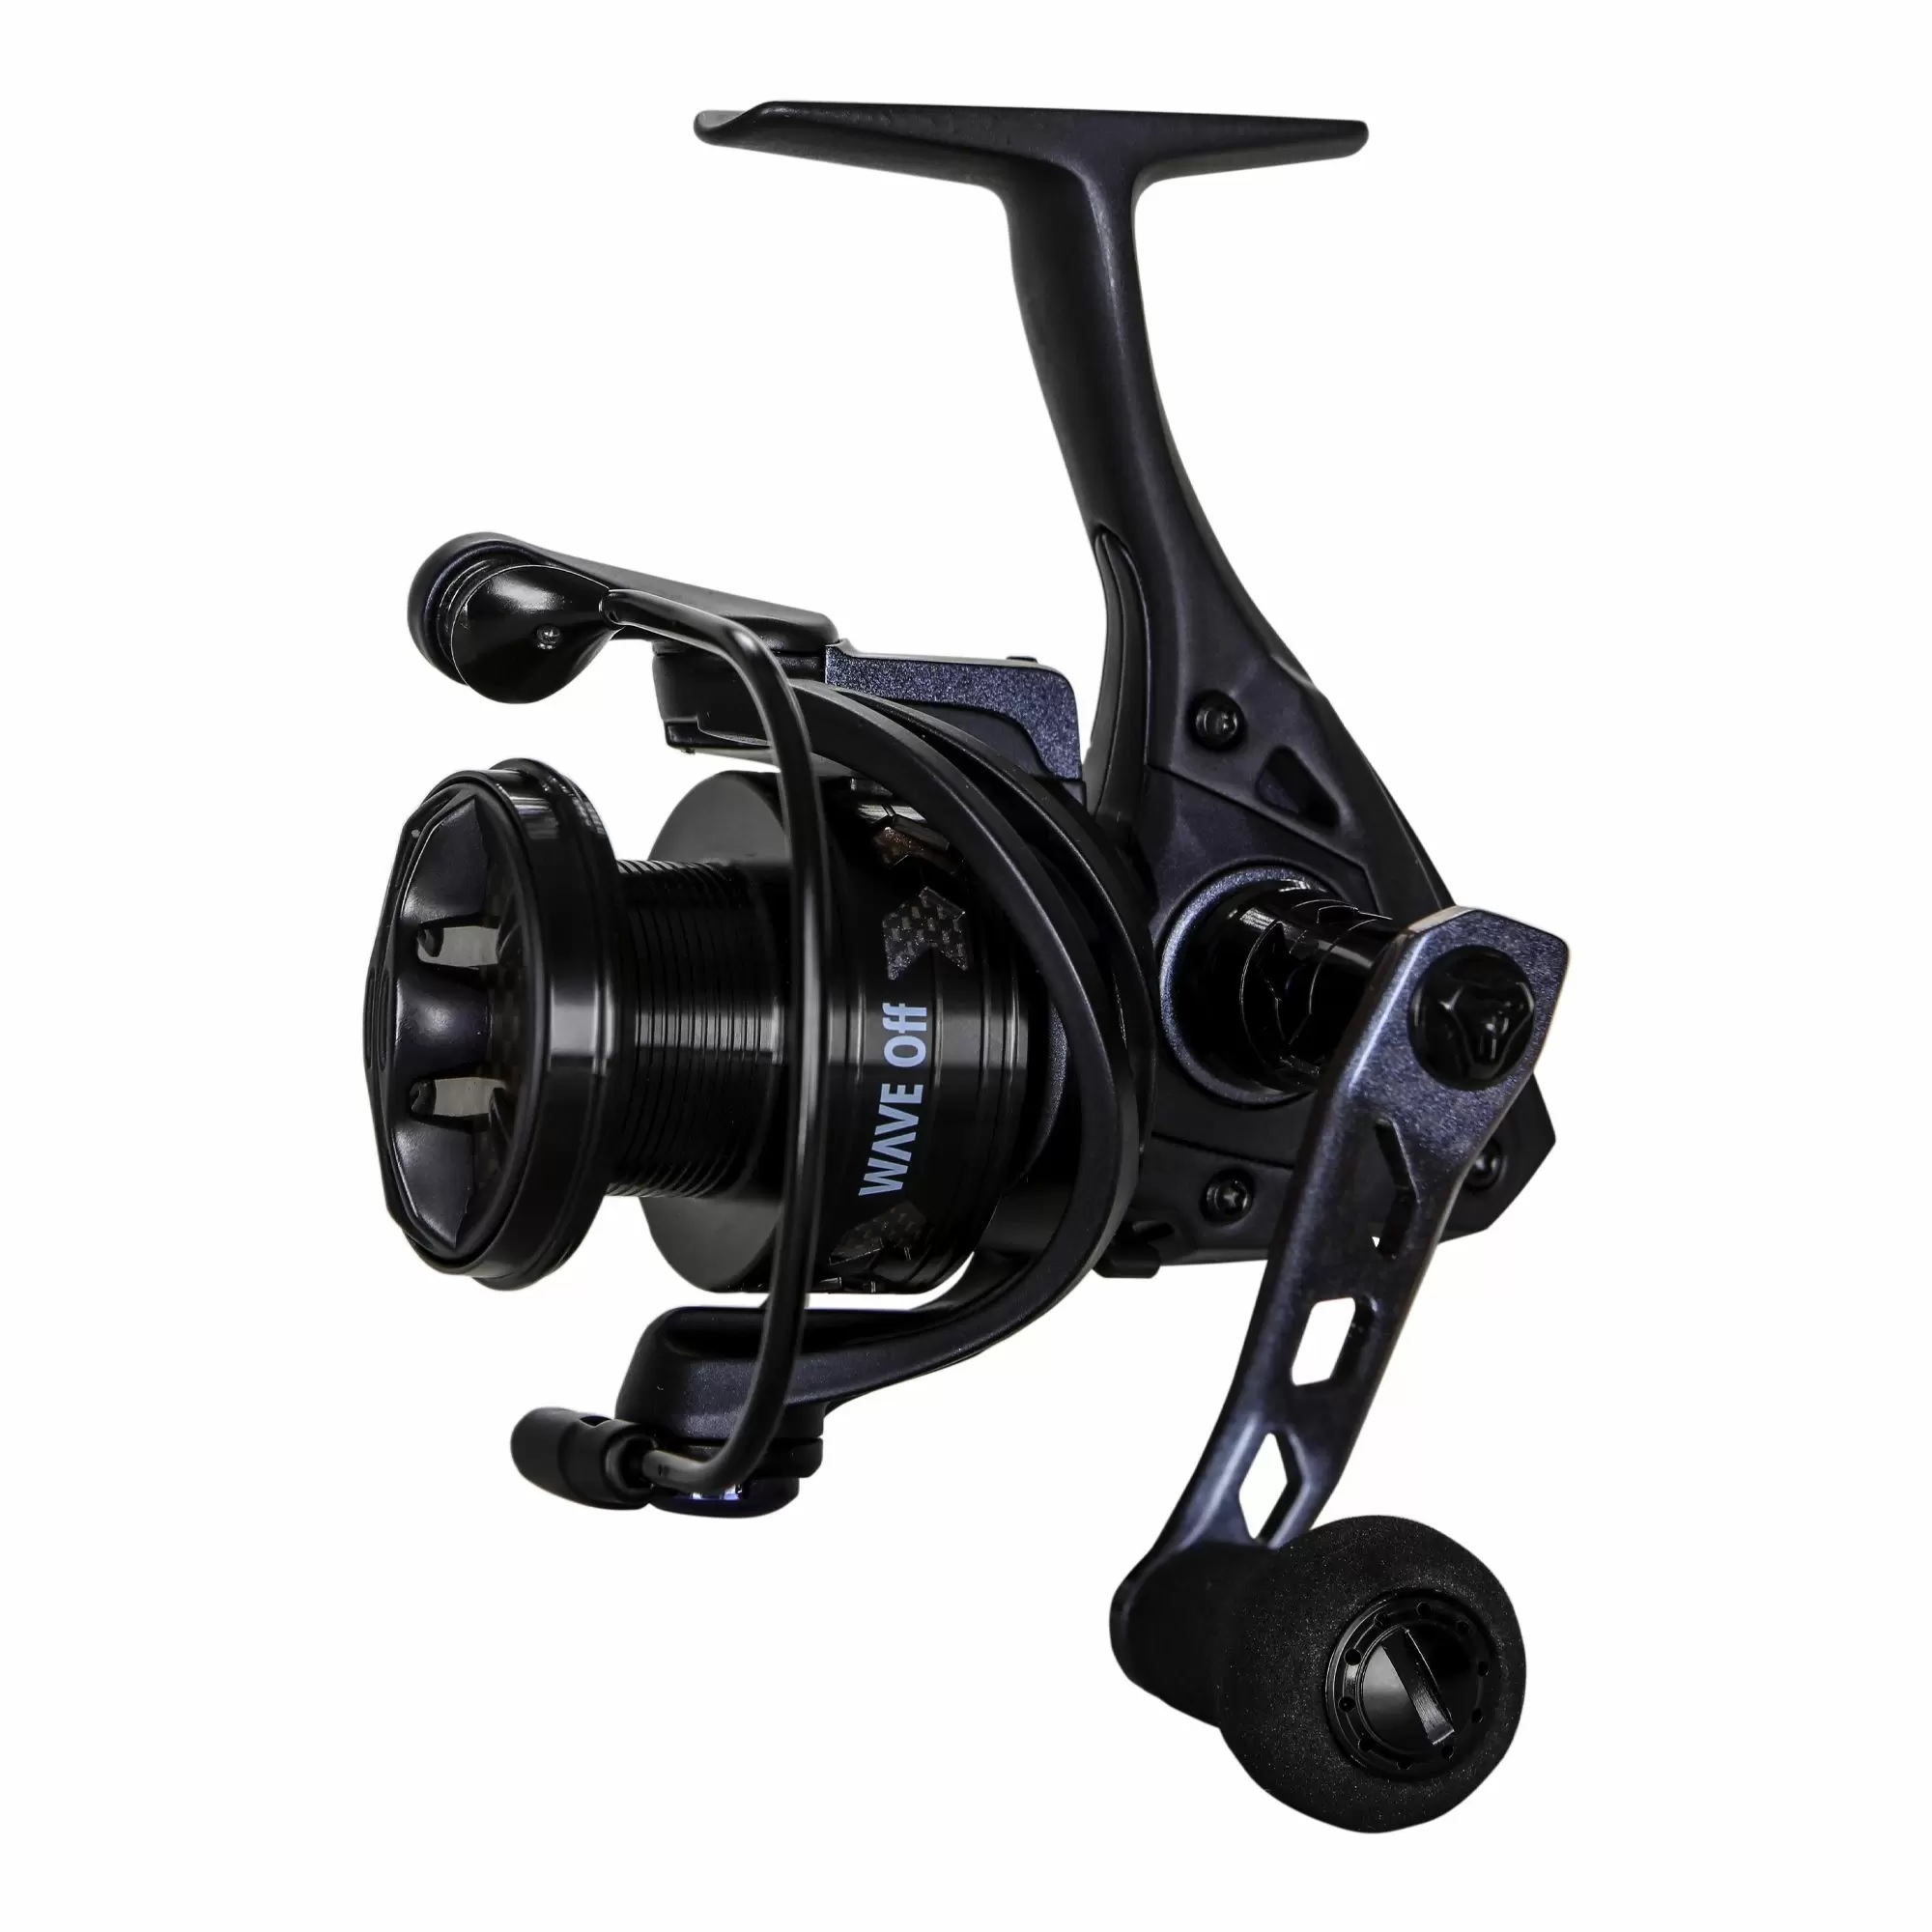 Okuma Wave Off Urban Fishing Mulinello da spinning + Speciale Vernice Paint Off (Limited Edition)